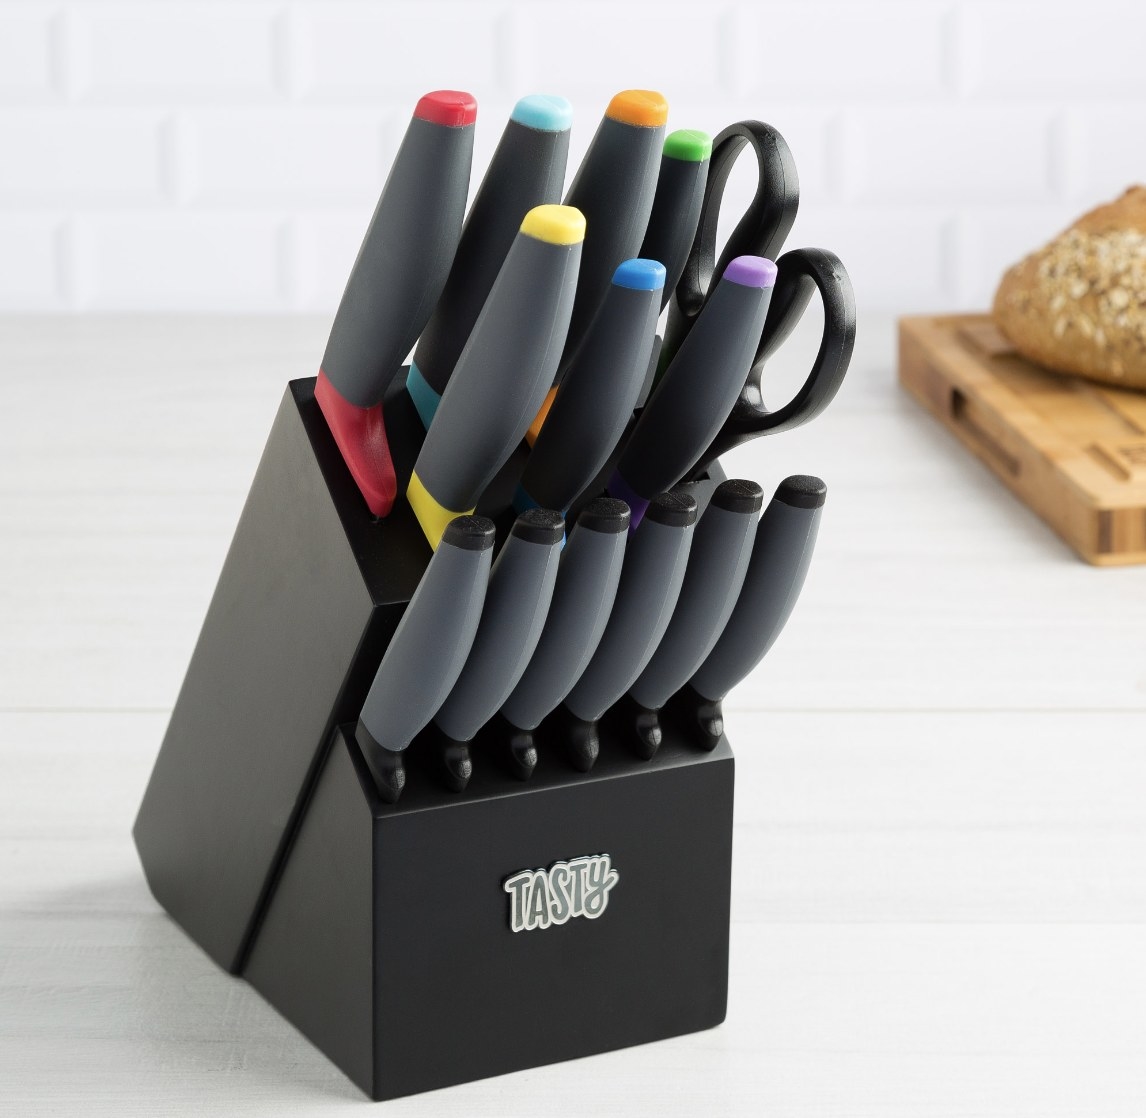 The black knife block says &quot;TASTY&quot;  and there are knifes with various colored handles